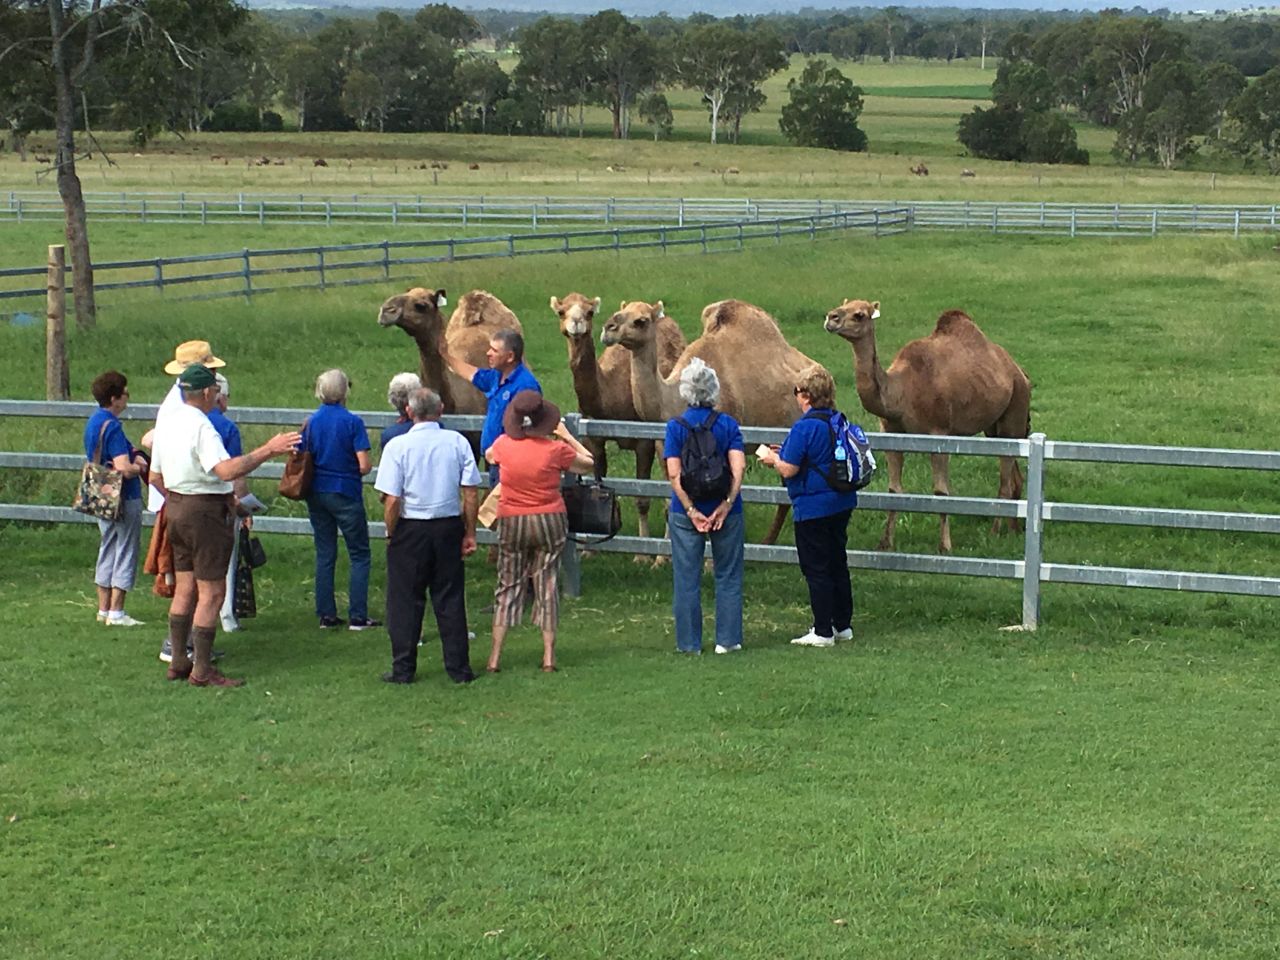 Talking with camels near Boonah